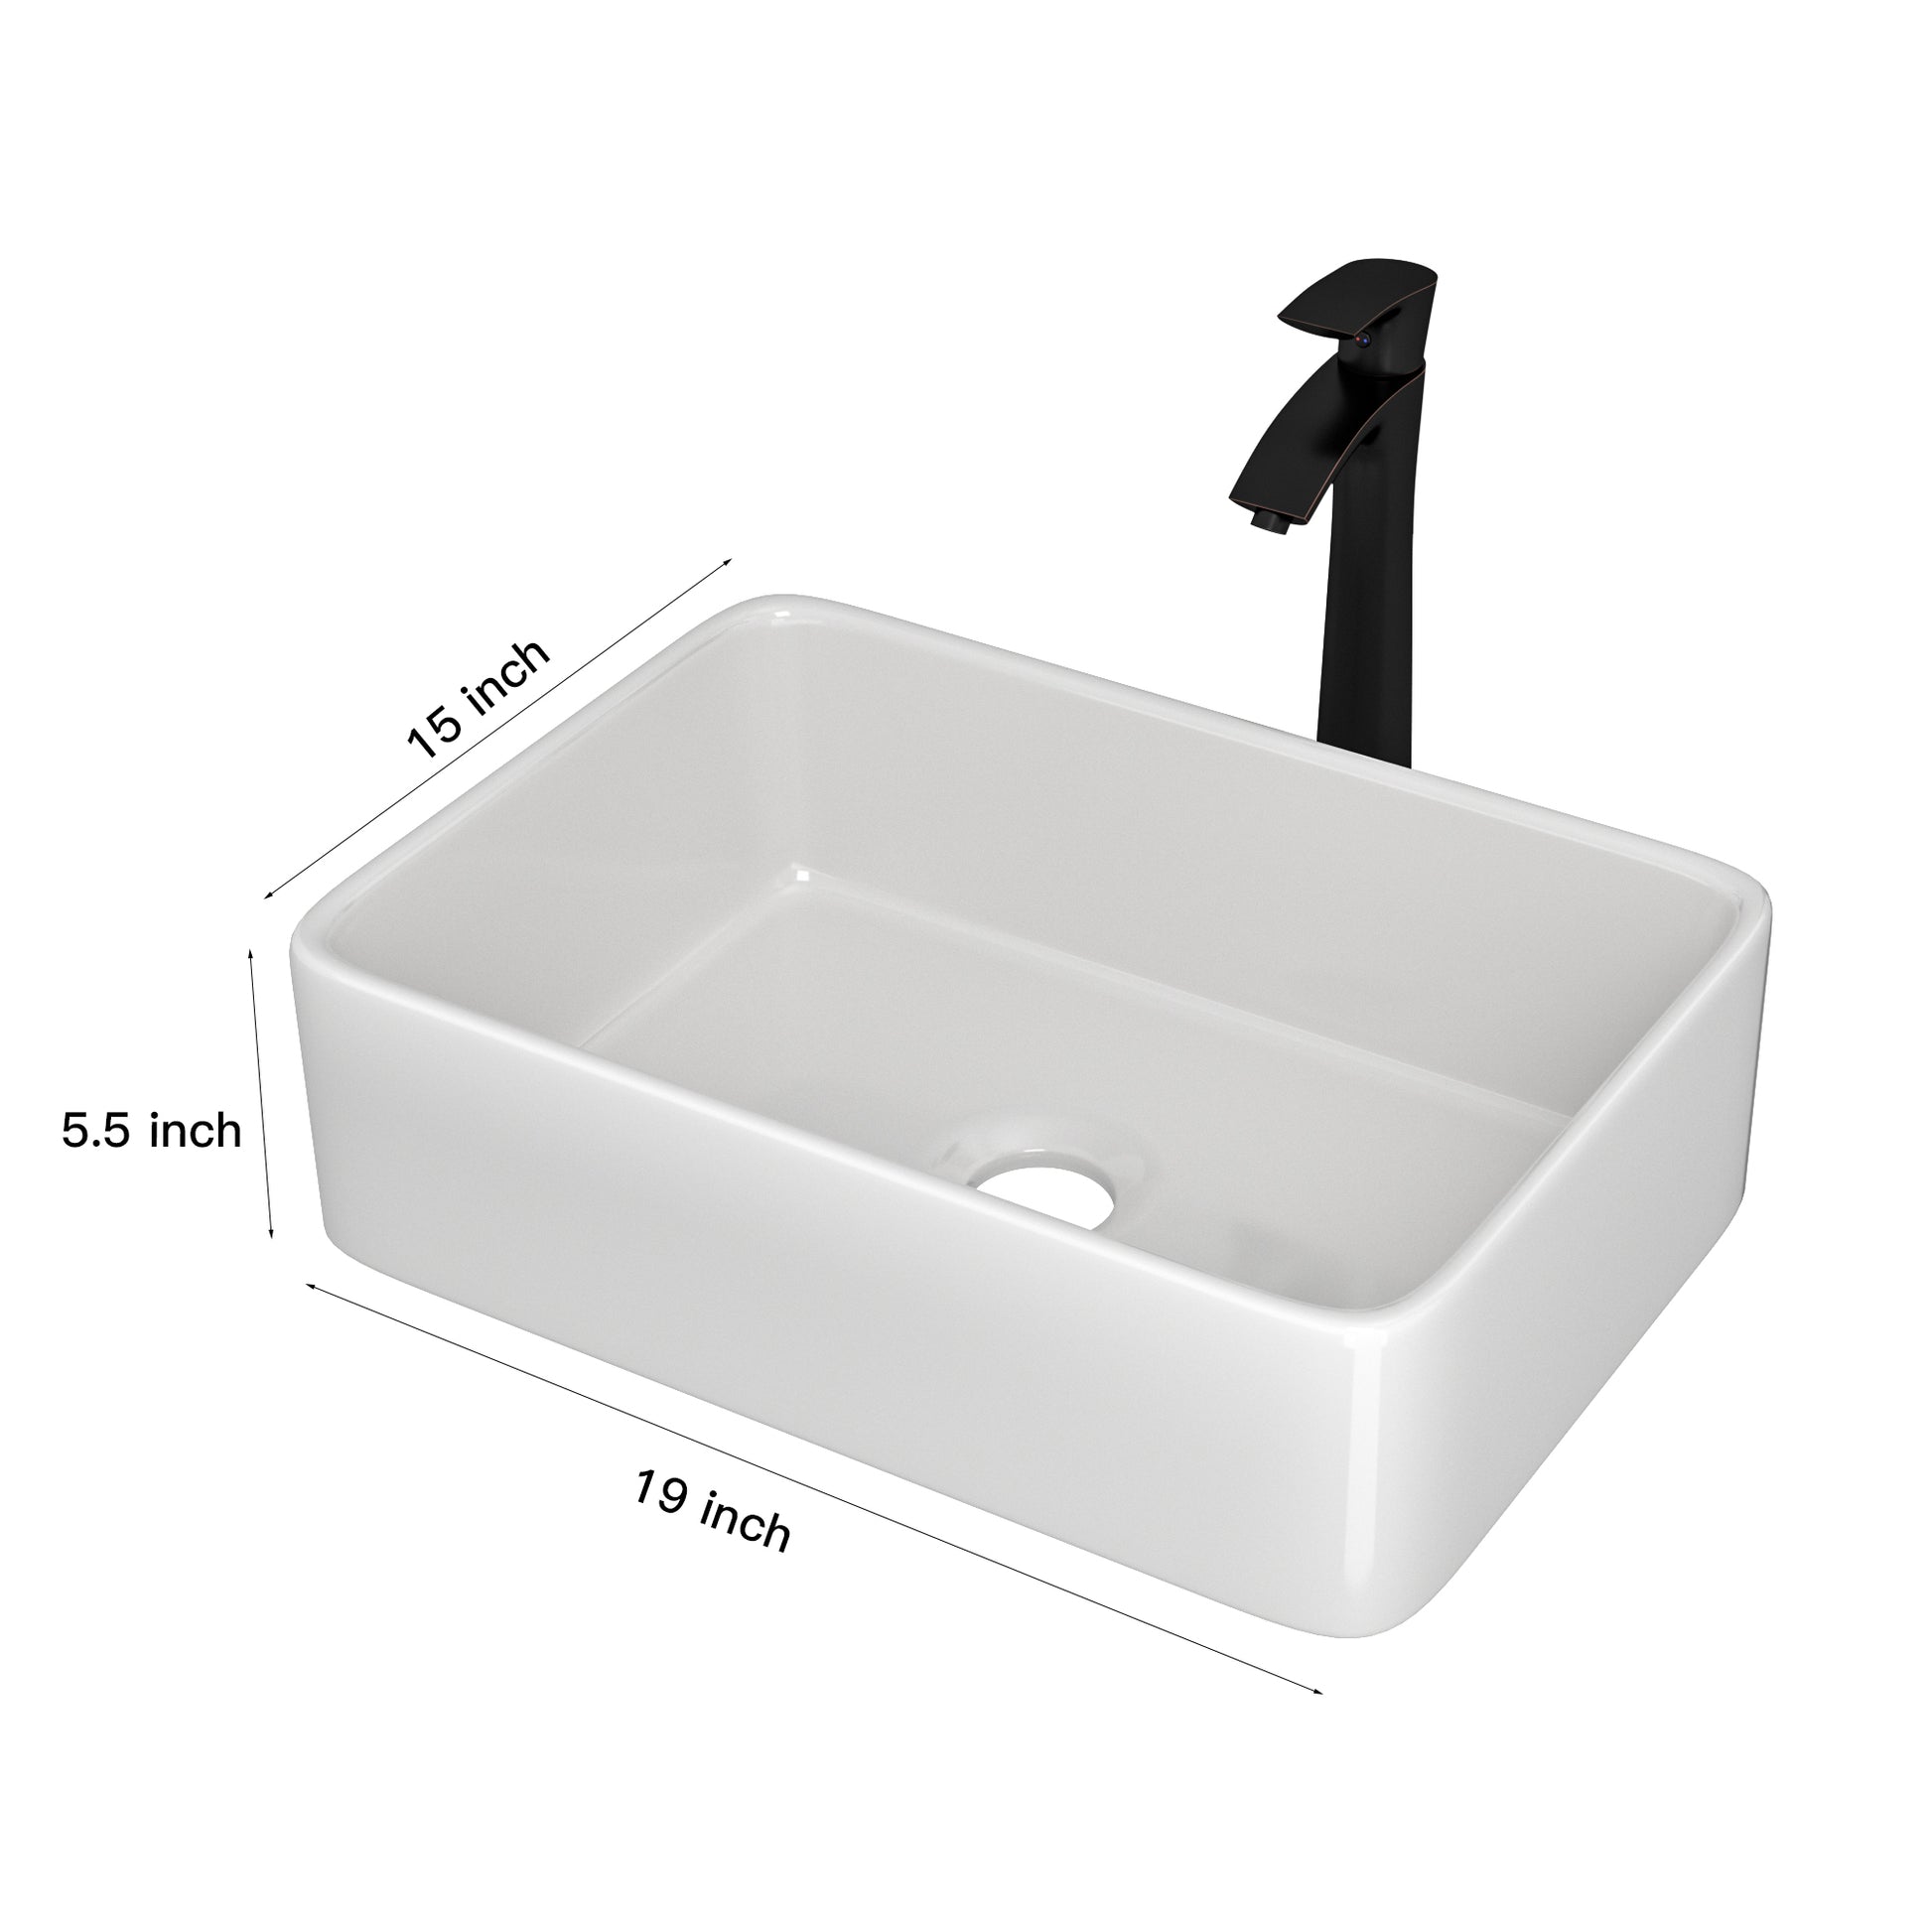 19"x15" Rectangle Bathroom Sink and Faucet Combo white-ceramic